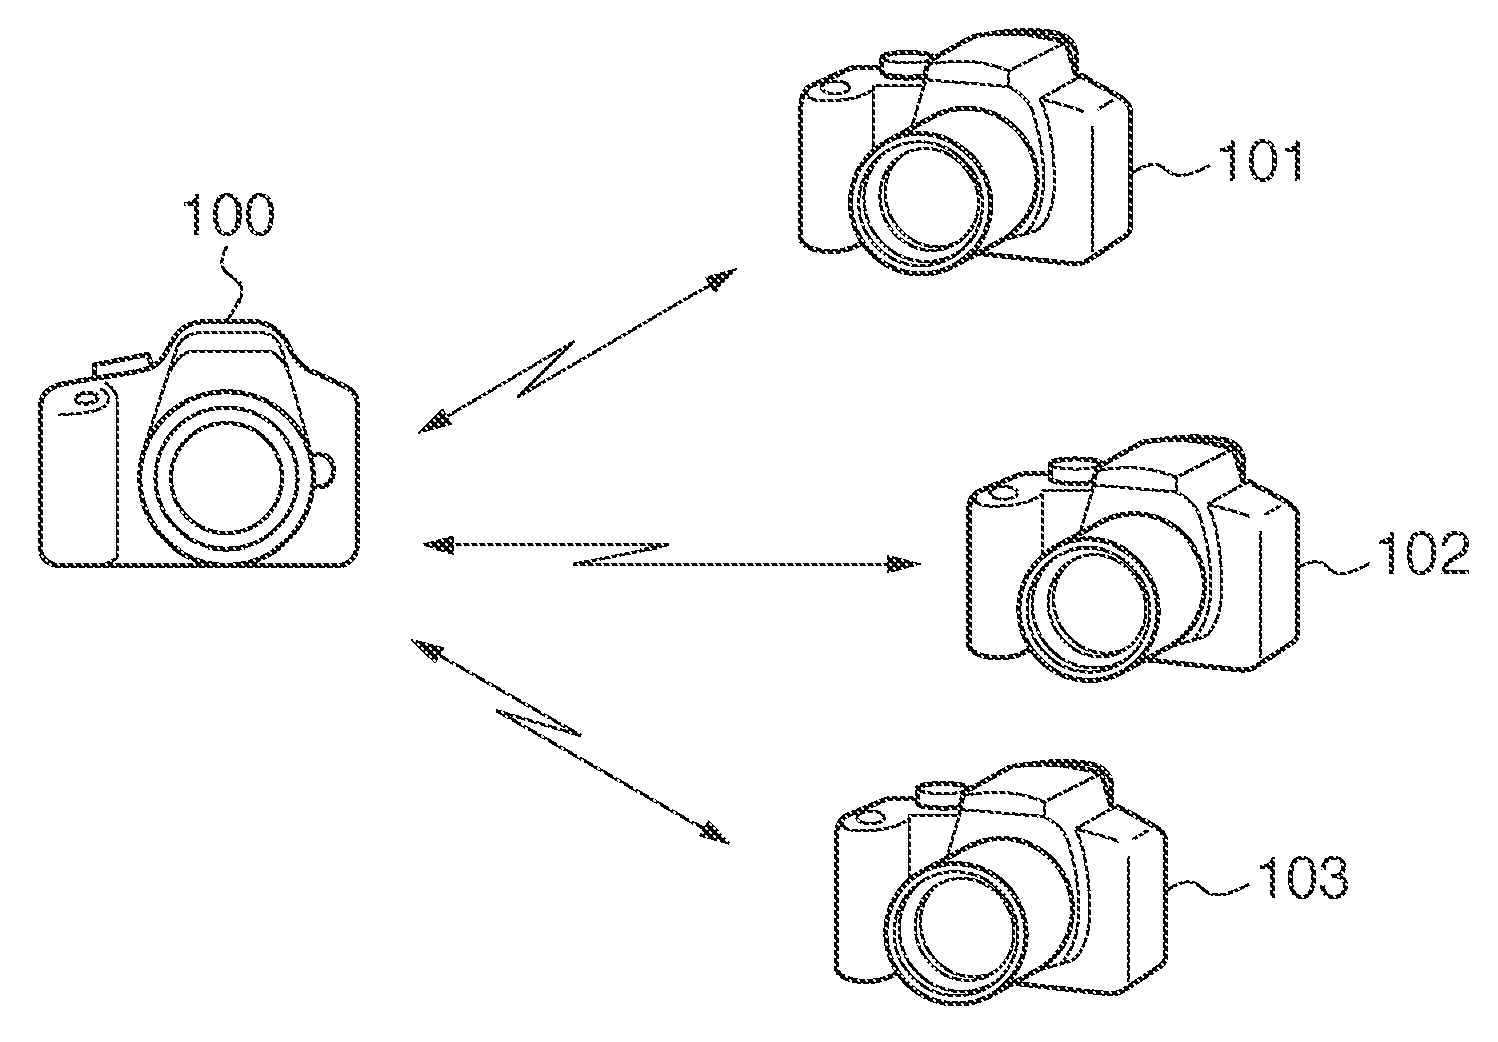 Control apparatus, control system, command transmission method, and non-transitory computer-readable storage medium